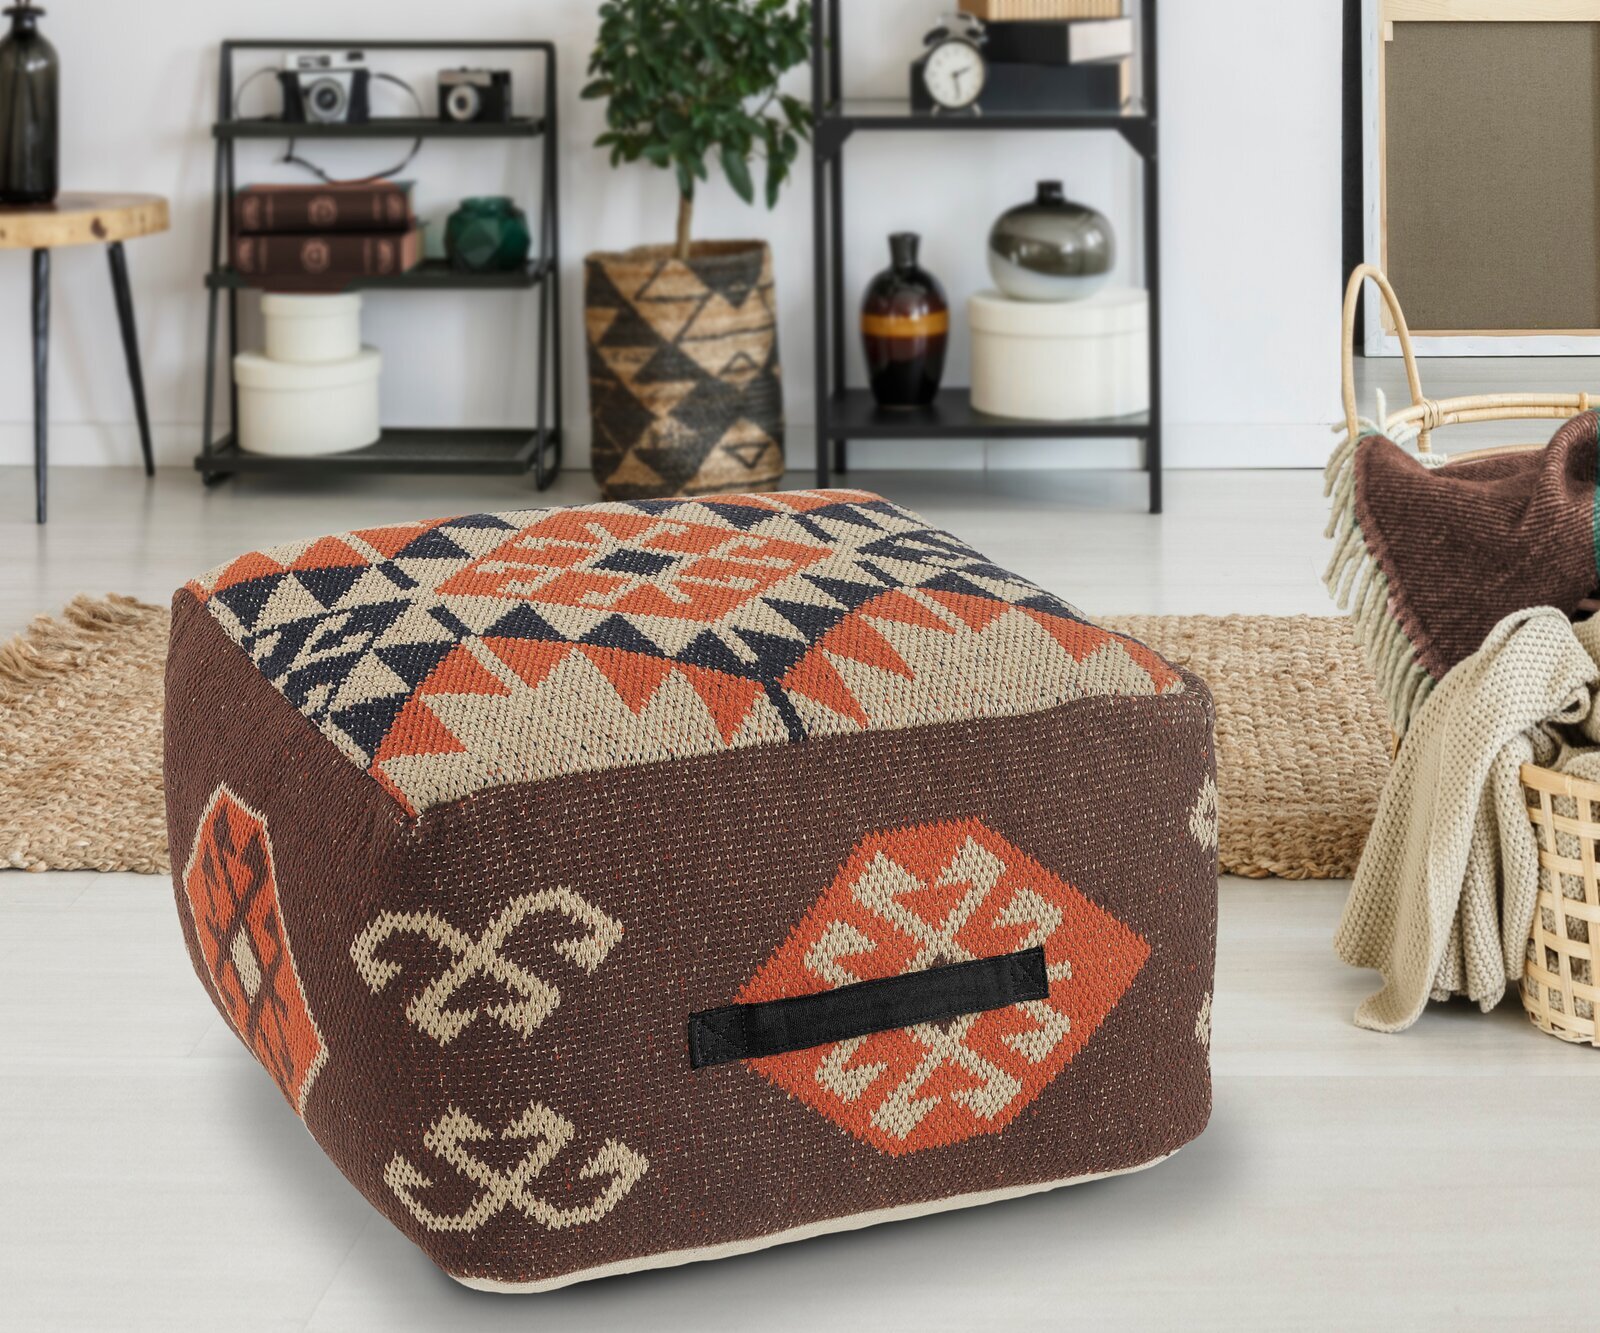 Consider a pouf for your desert southwest furniture…